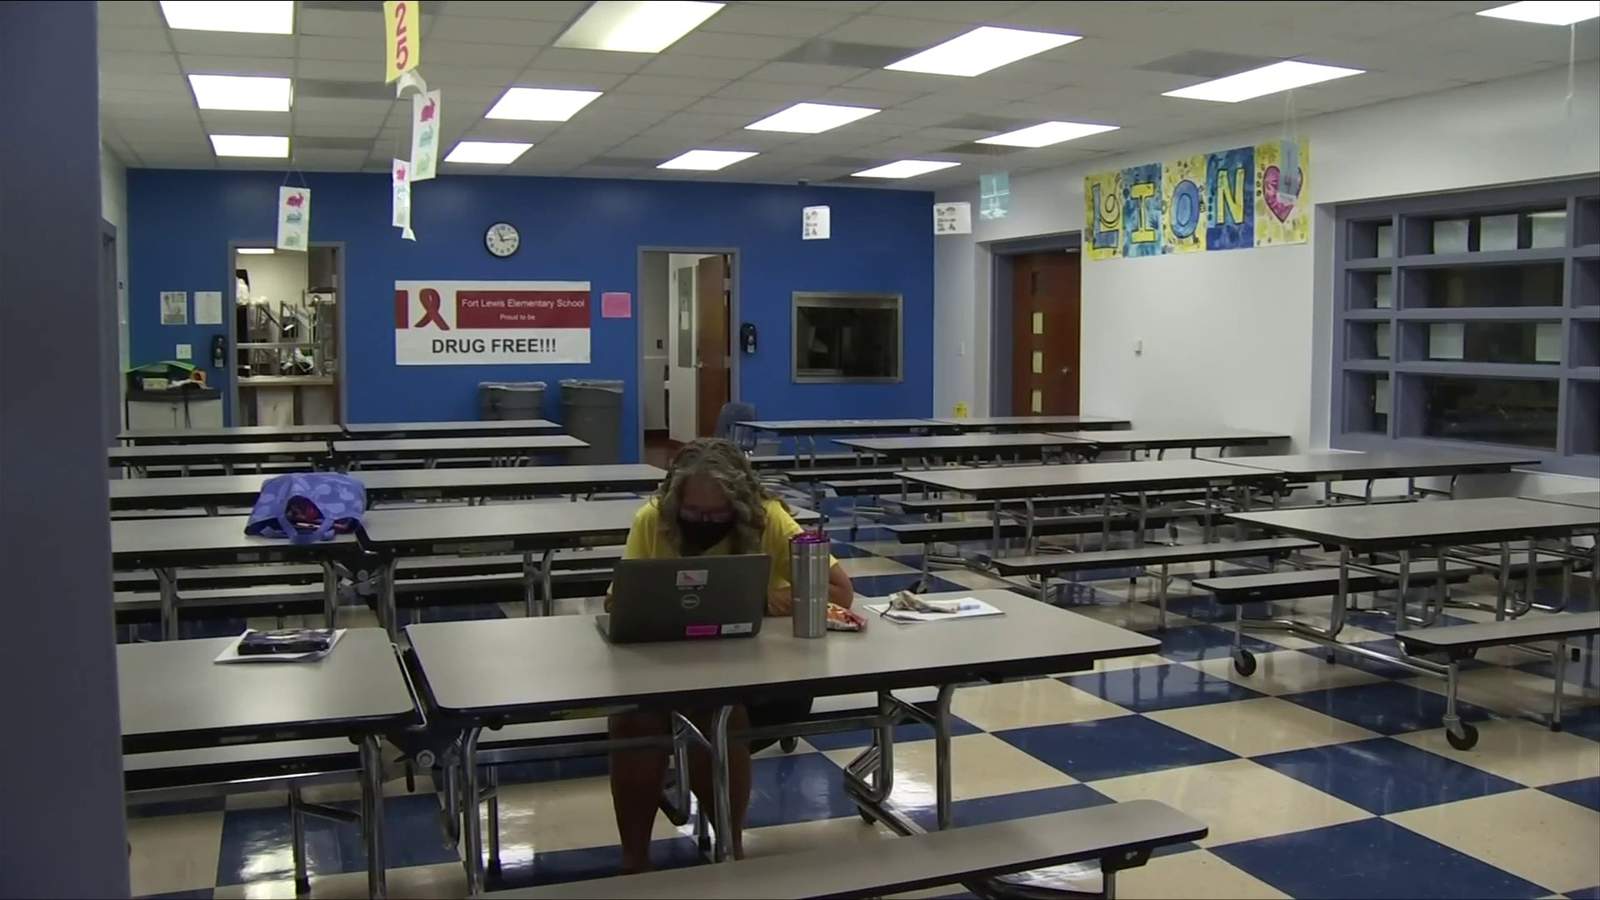 Roanoke Co. Public Schools welcomes students back into classrooms